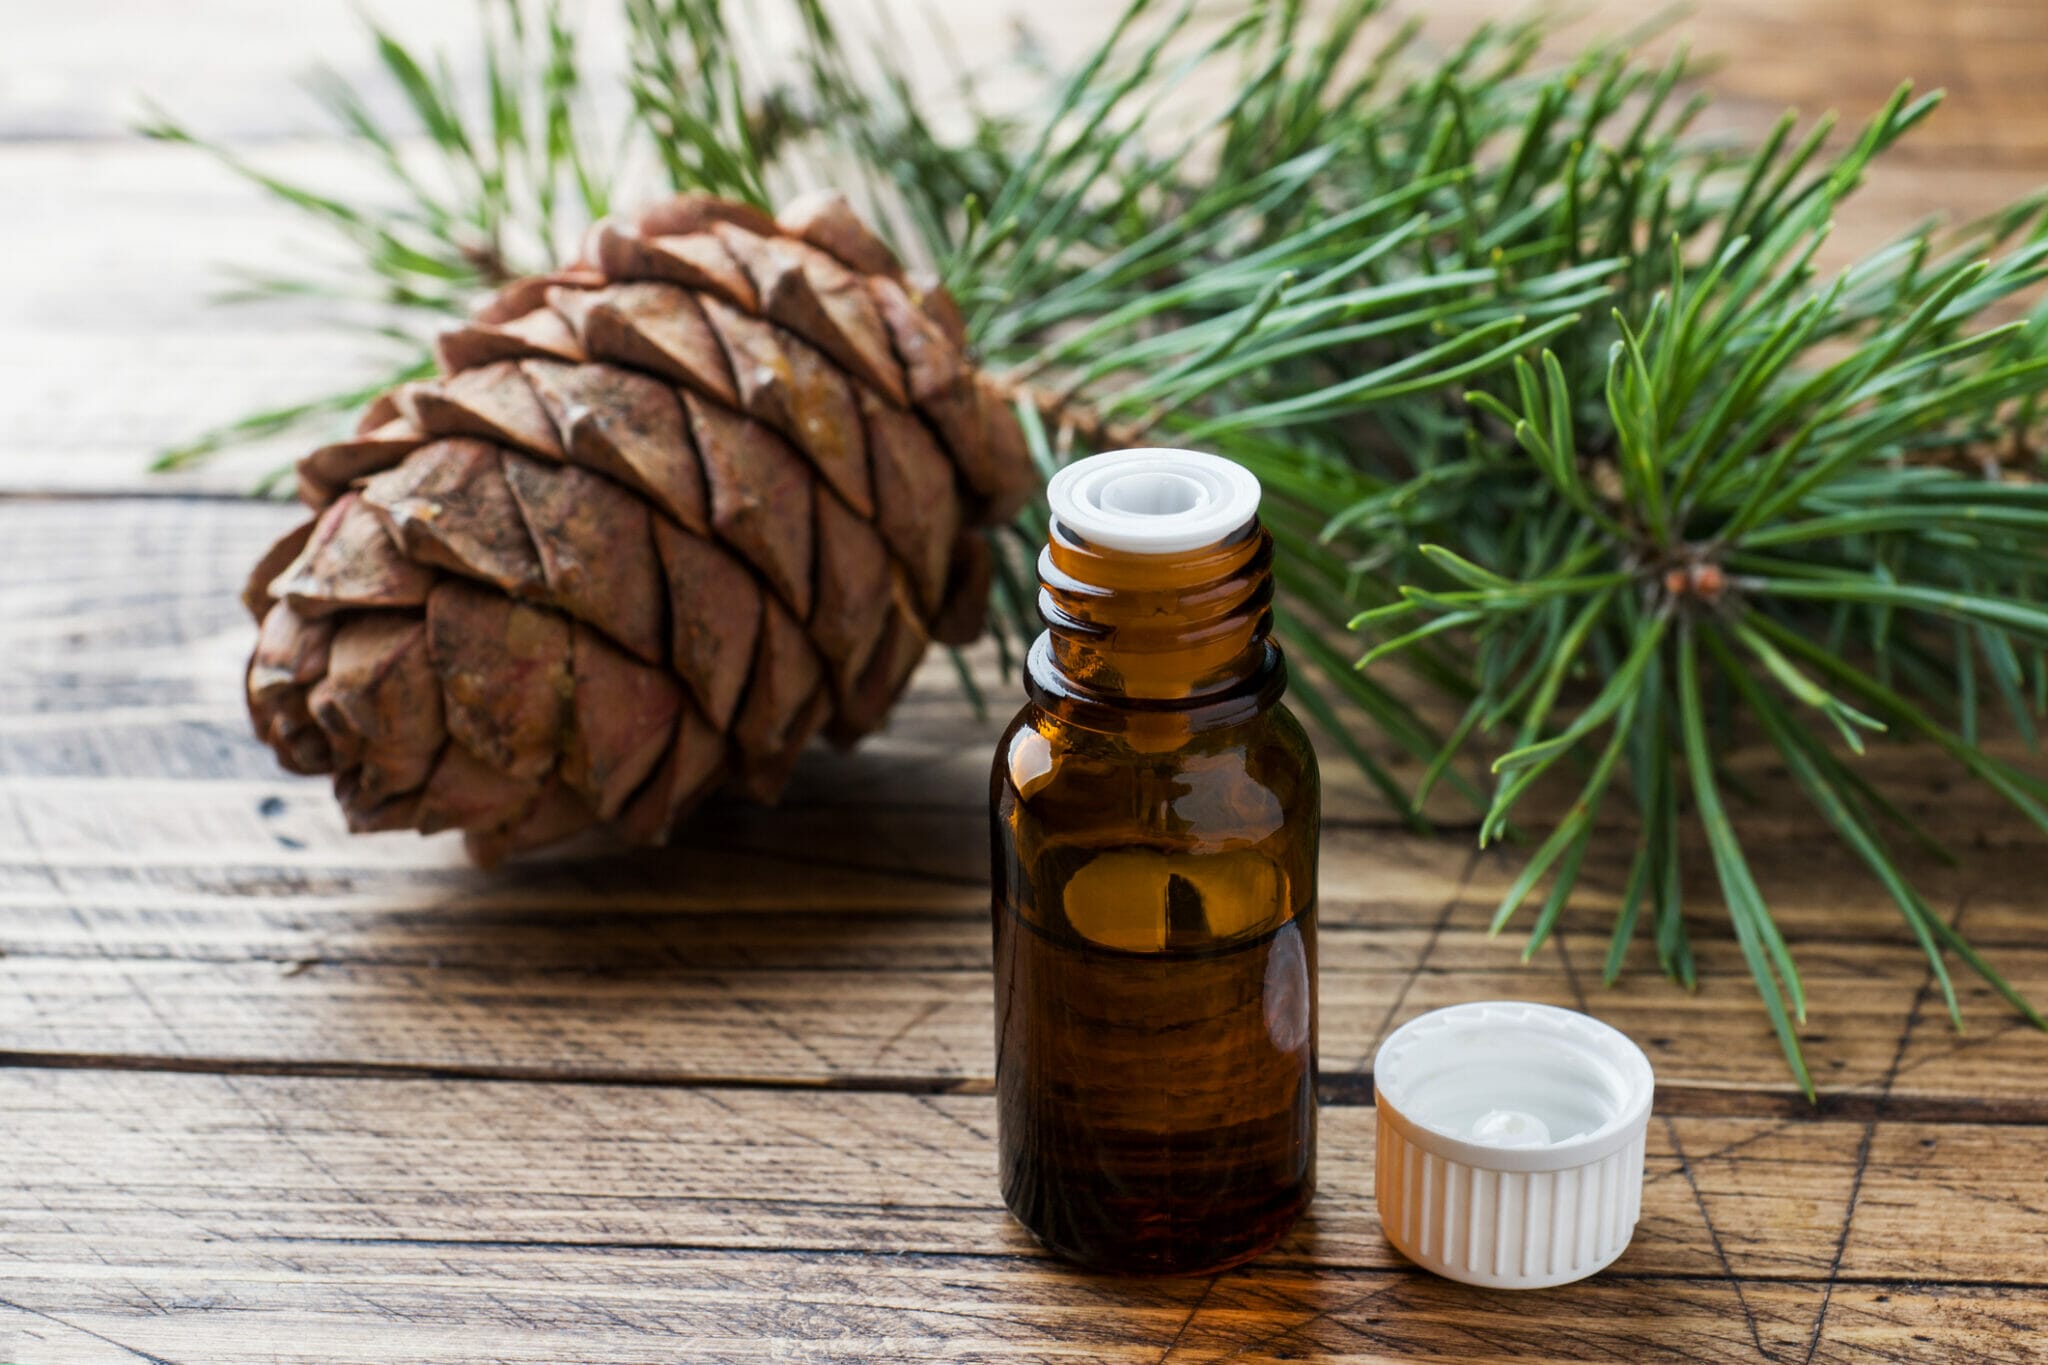 How to dilute cedarwood oil for dogs